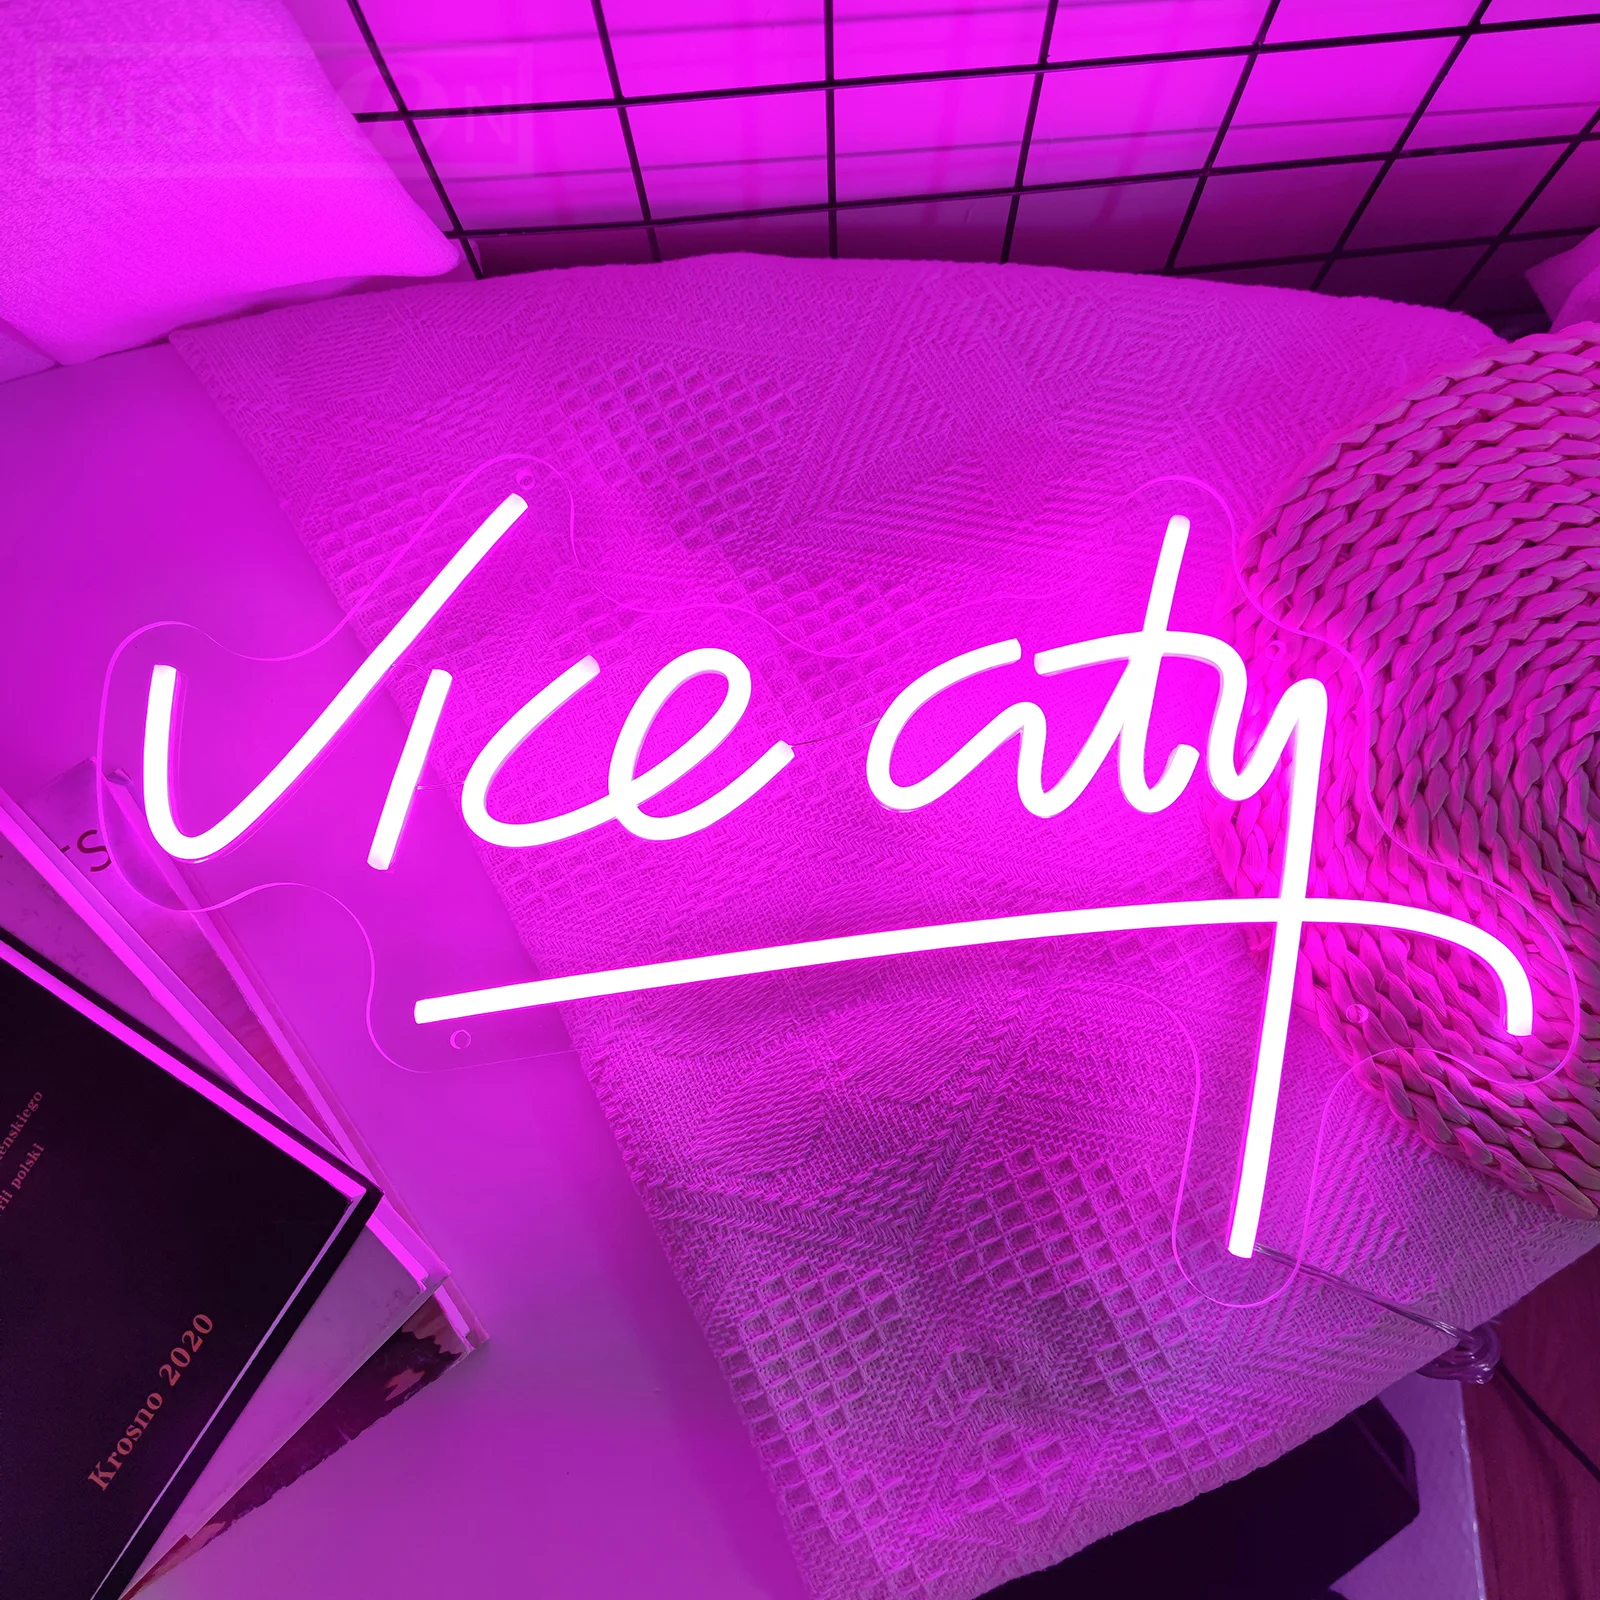 

Vice City Neon Sign LED Lights Letter Wall Decor Neon Signs for Party Bar Club Gaming Room Personalised Neon Decoration USB 5V